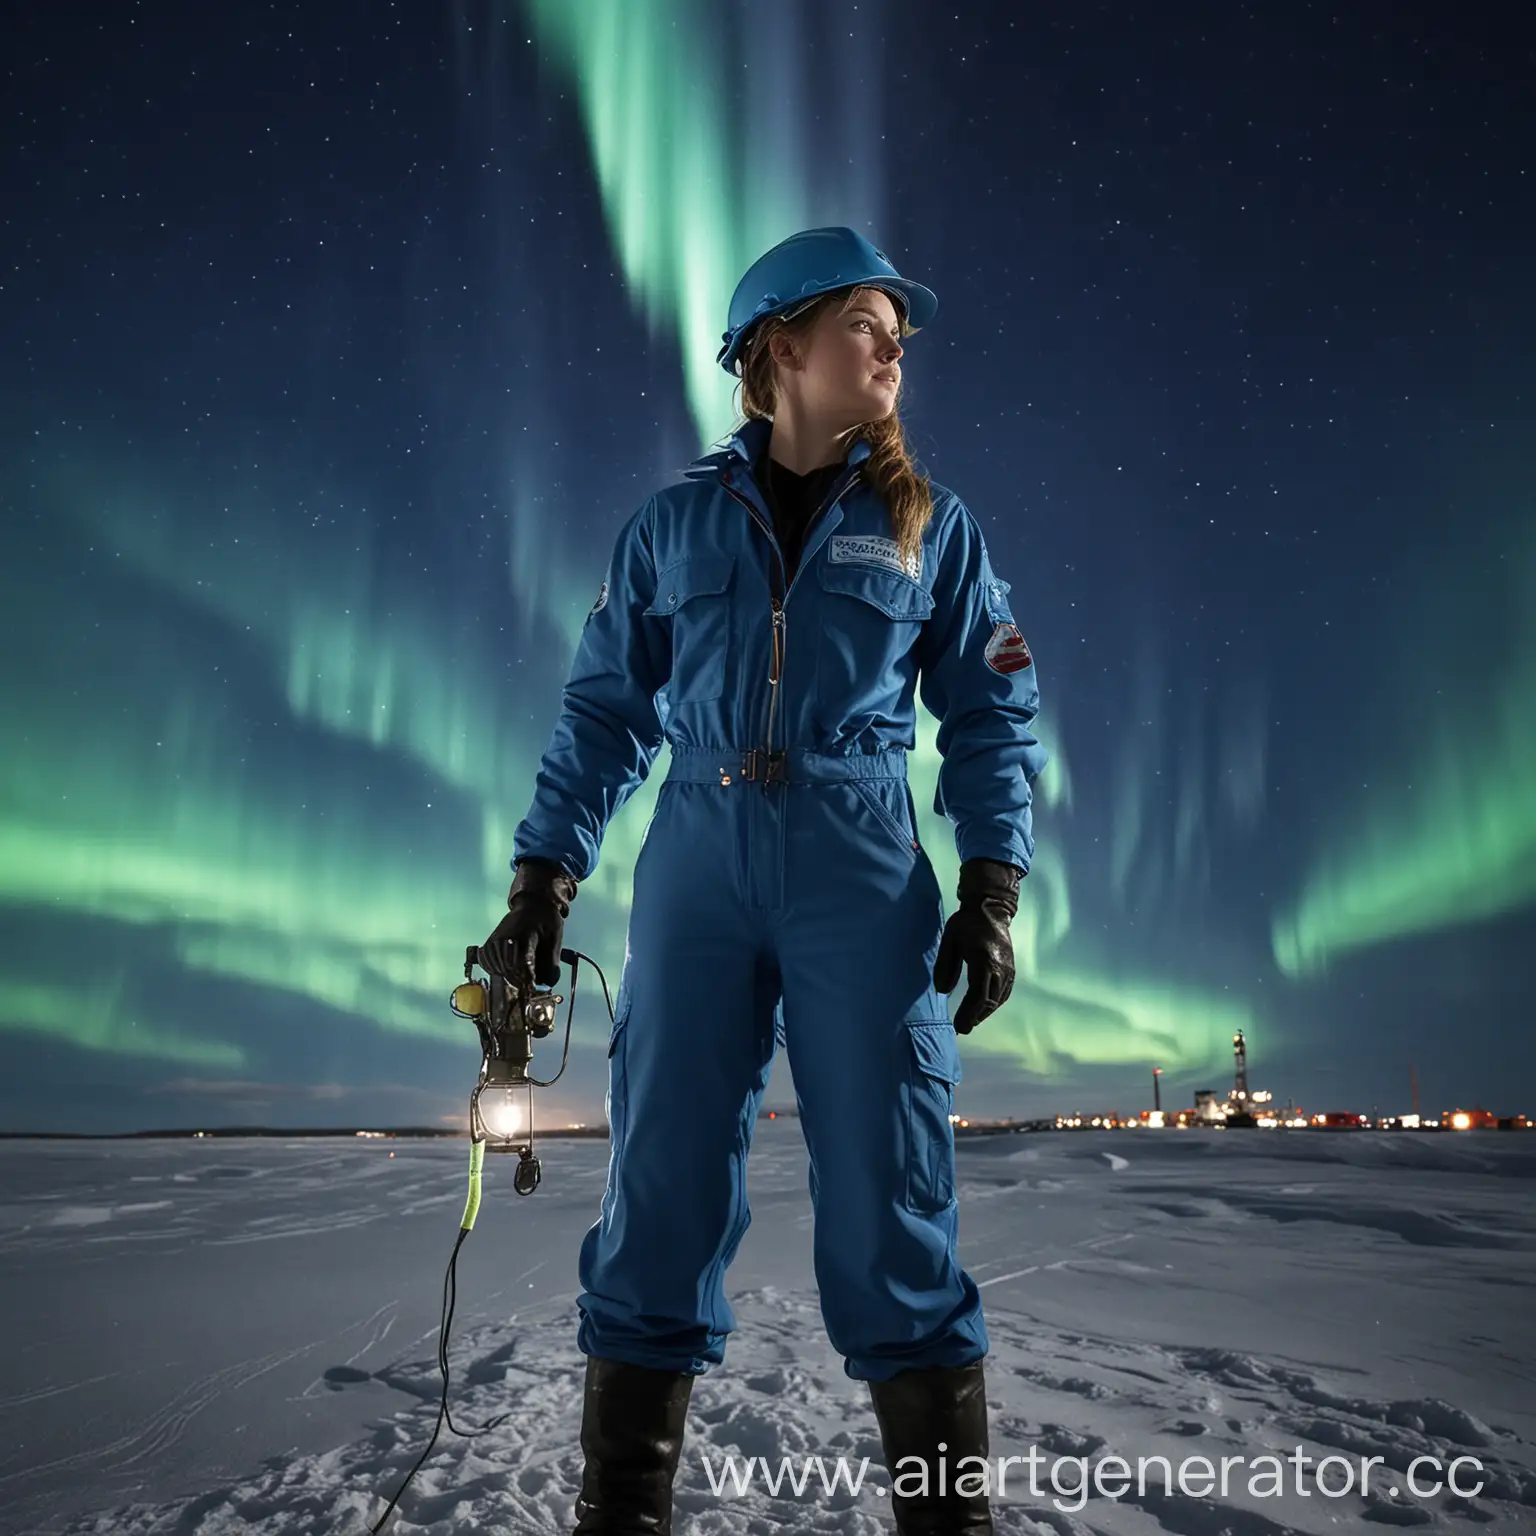 Girl-Oilworker-in-Blue-Suit-Amidst-Northern-Lights